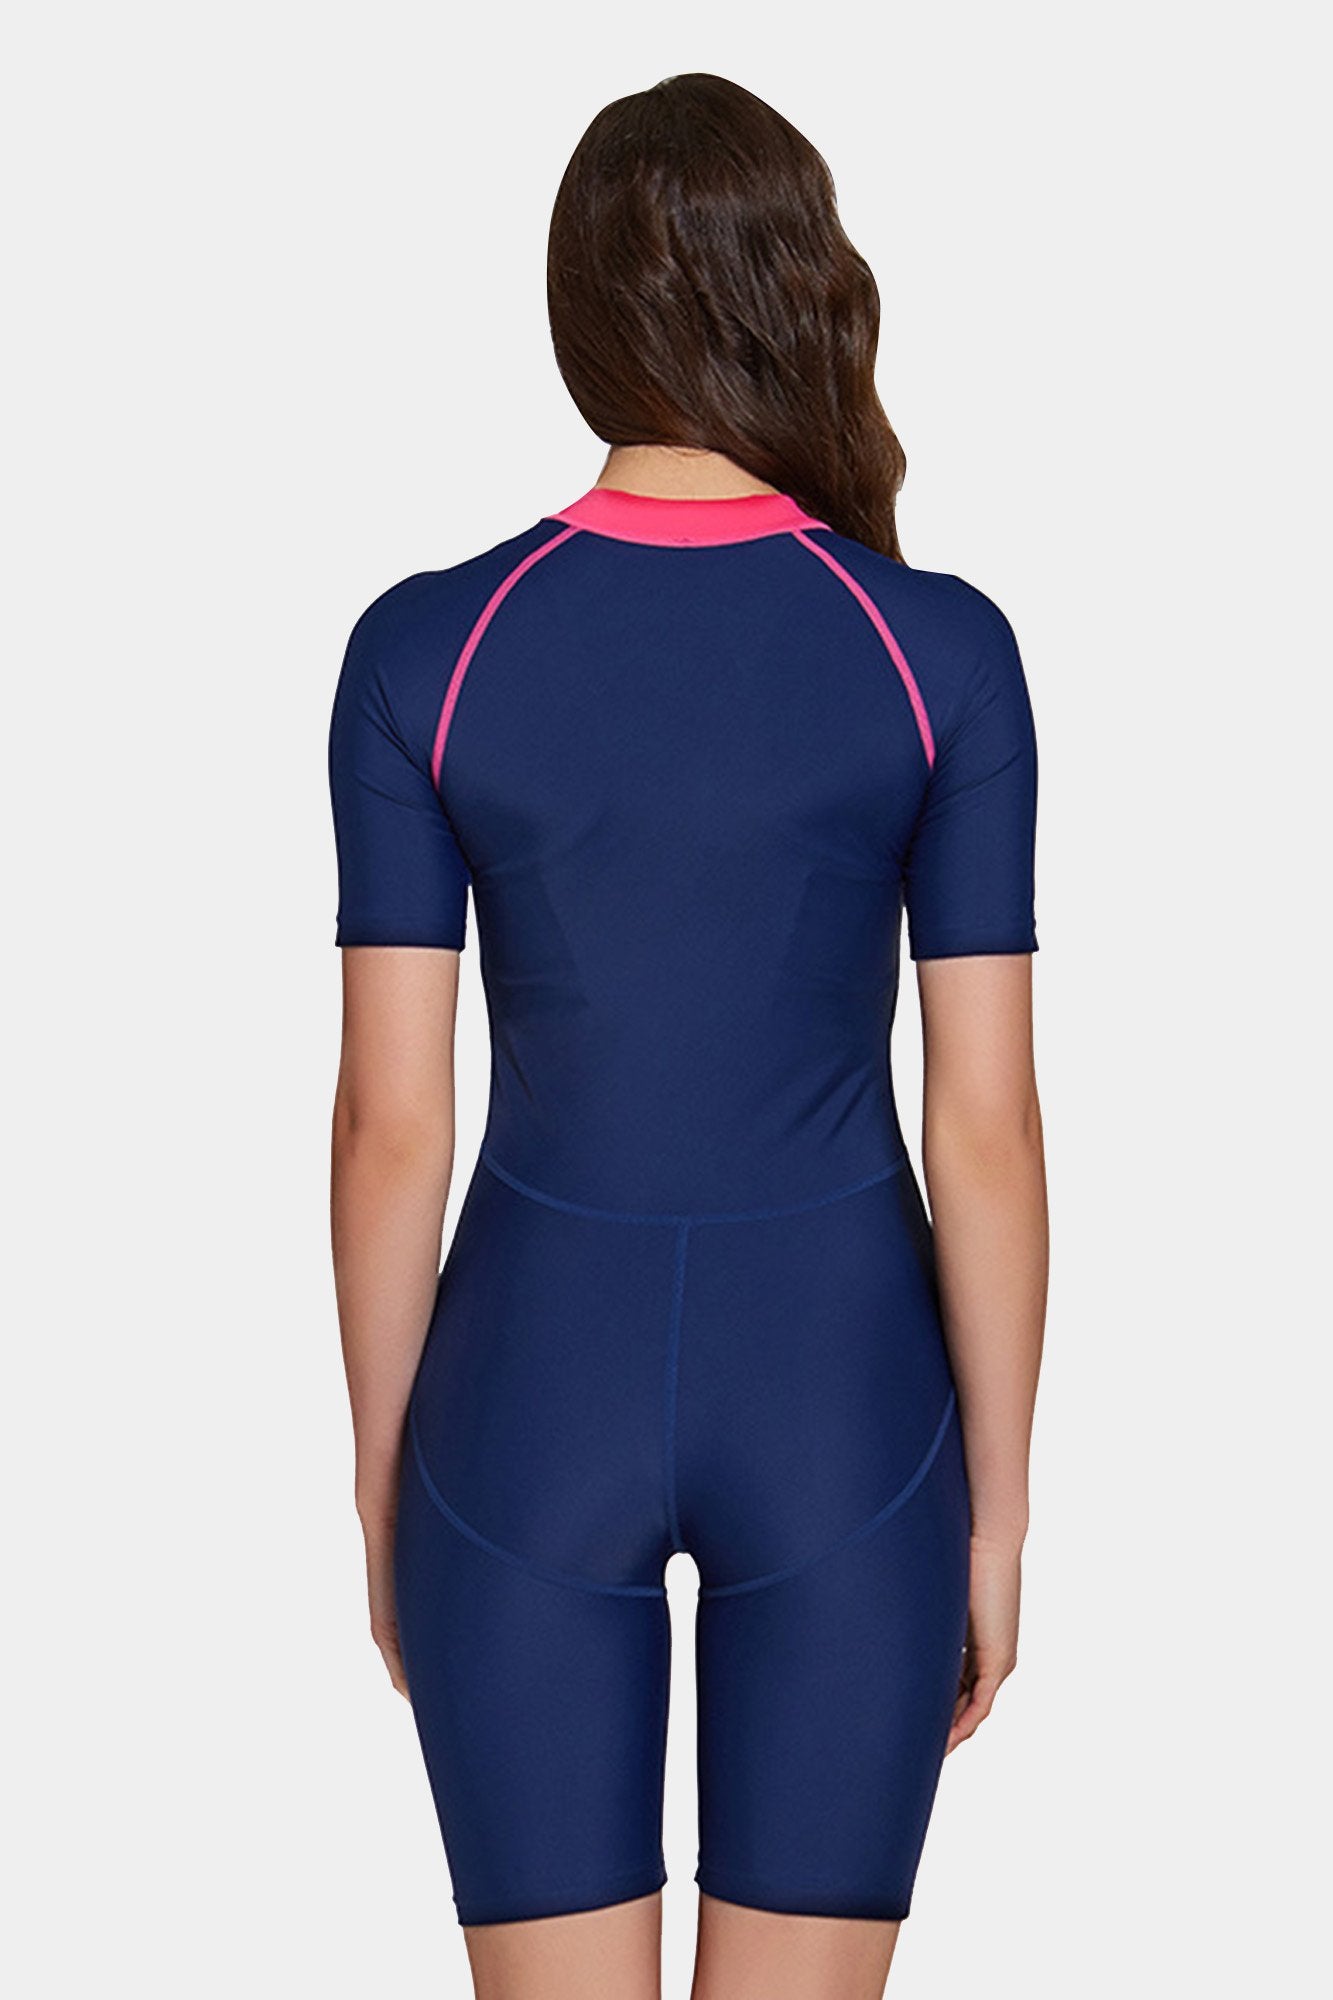 Clearance Attraco Women's Short Sleeve One Piece Rash Guard-Attraco | Fashion Outdoor Clothing